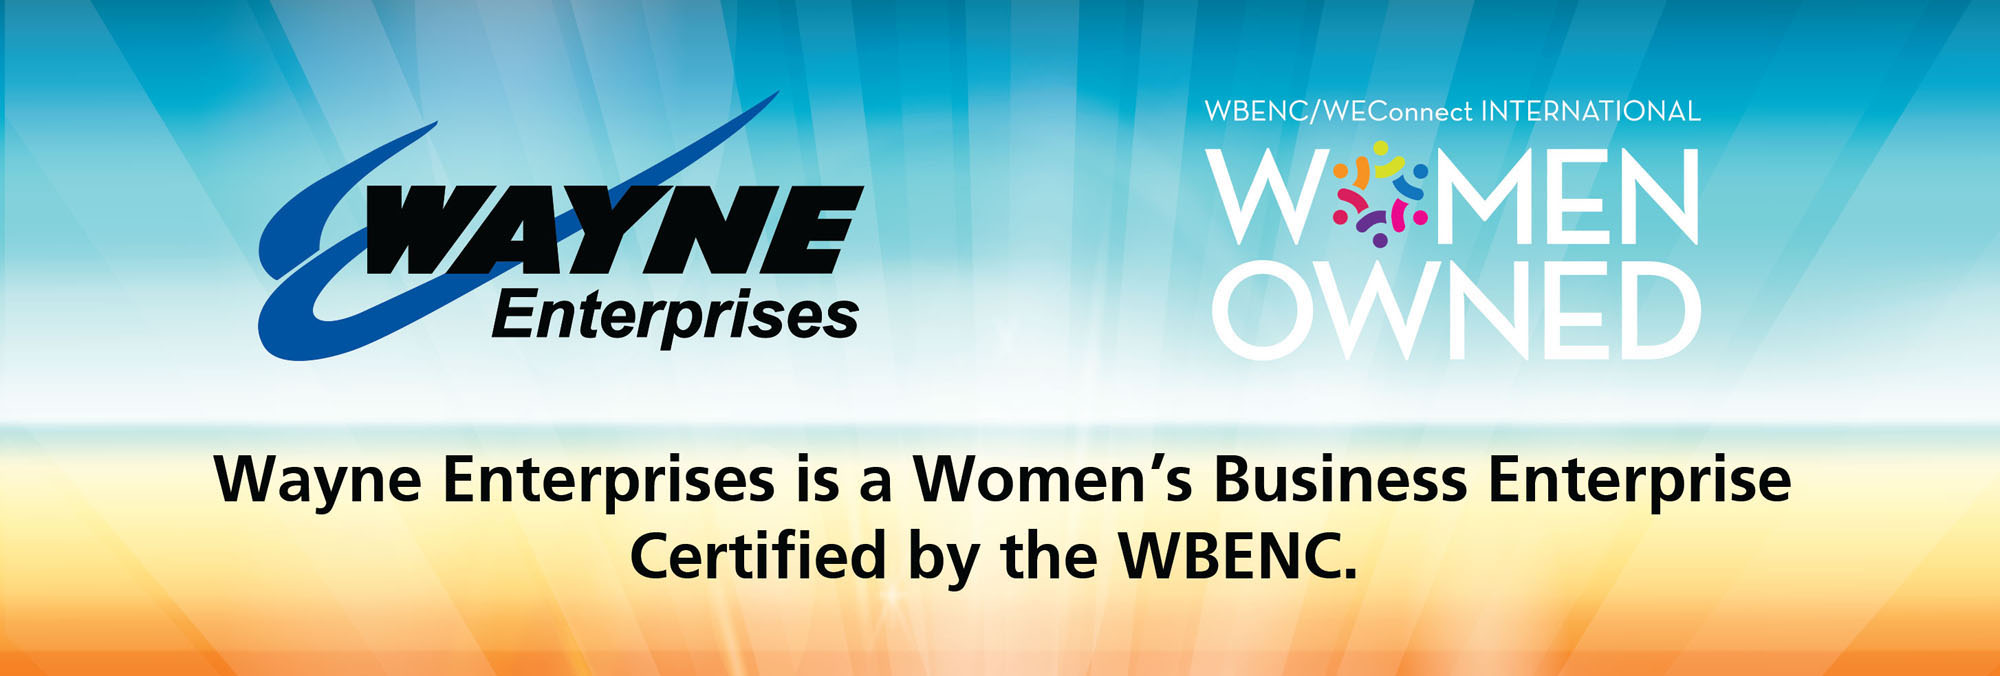 Wayne Enterprises is Now a Certified Woman Owned Business by the WBENC